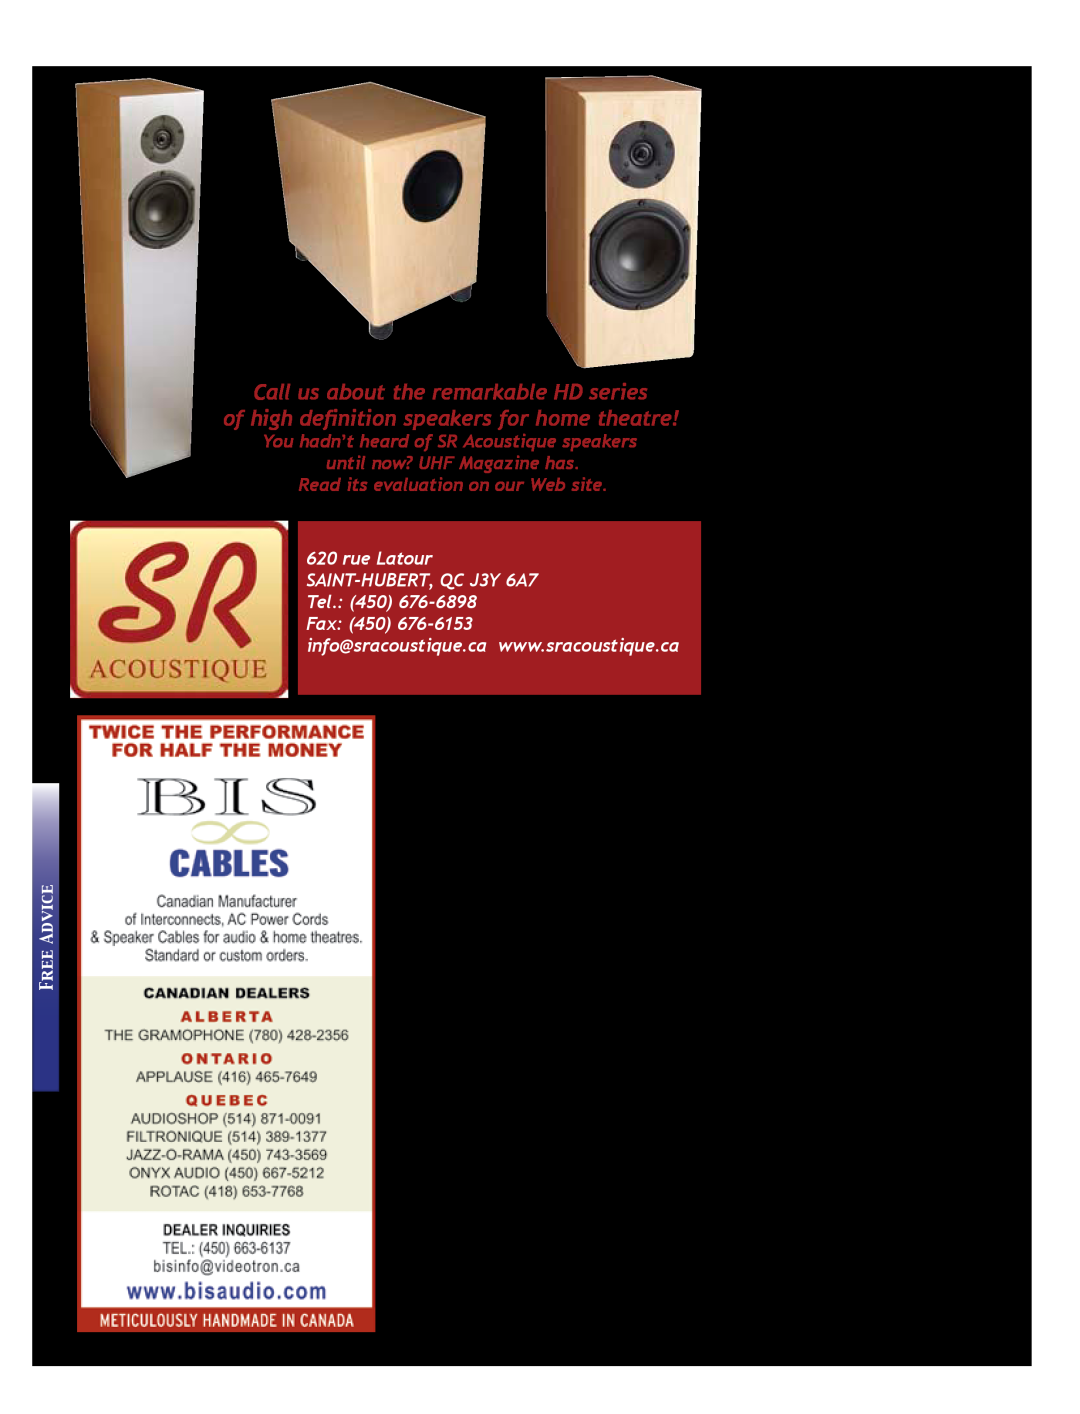 Koss 76 Call us about the remarkable HD series, of high definition speakers for home theatre, Jay Avril CLEARWATER, FL 